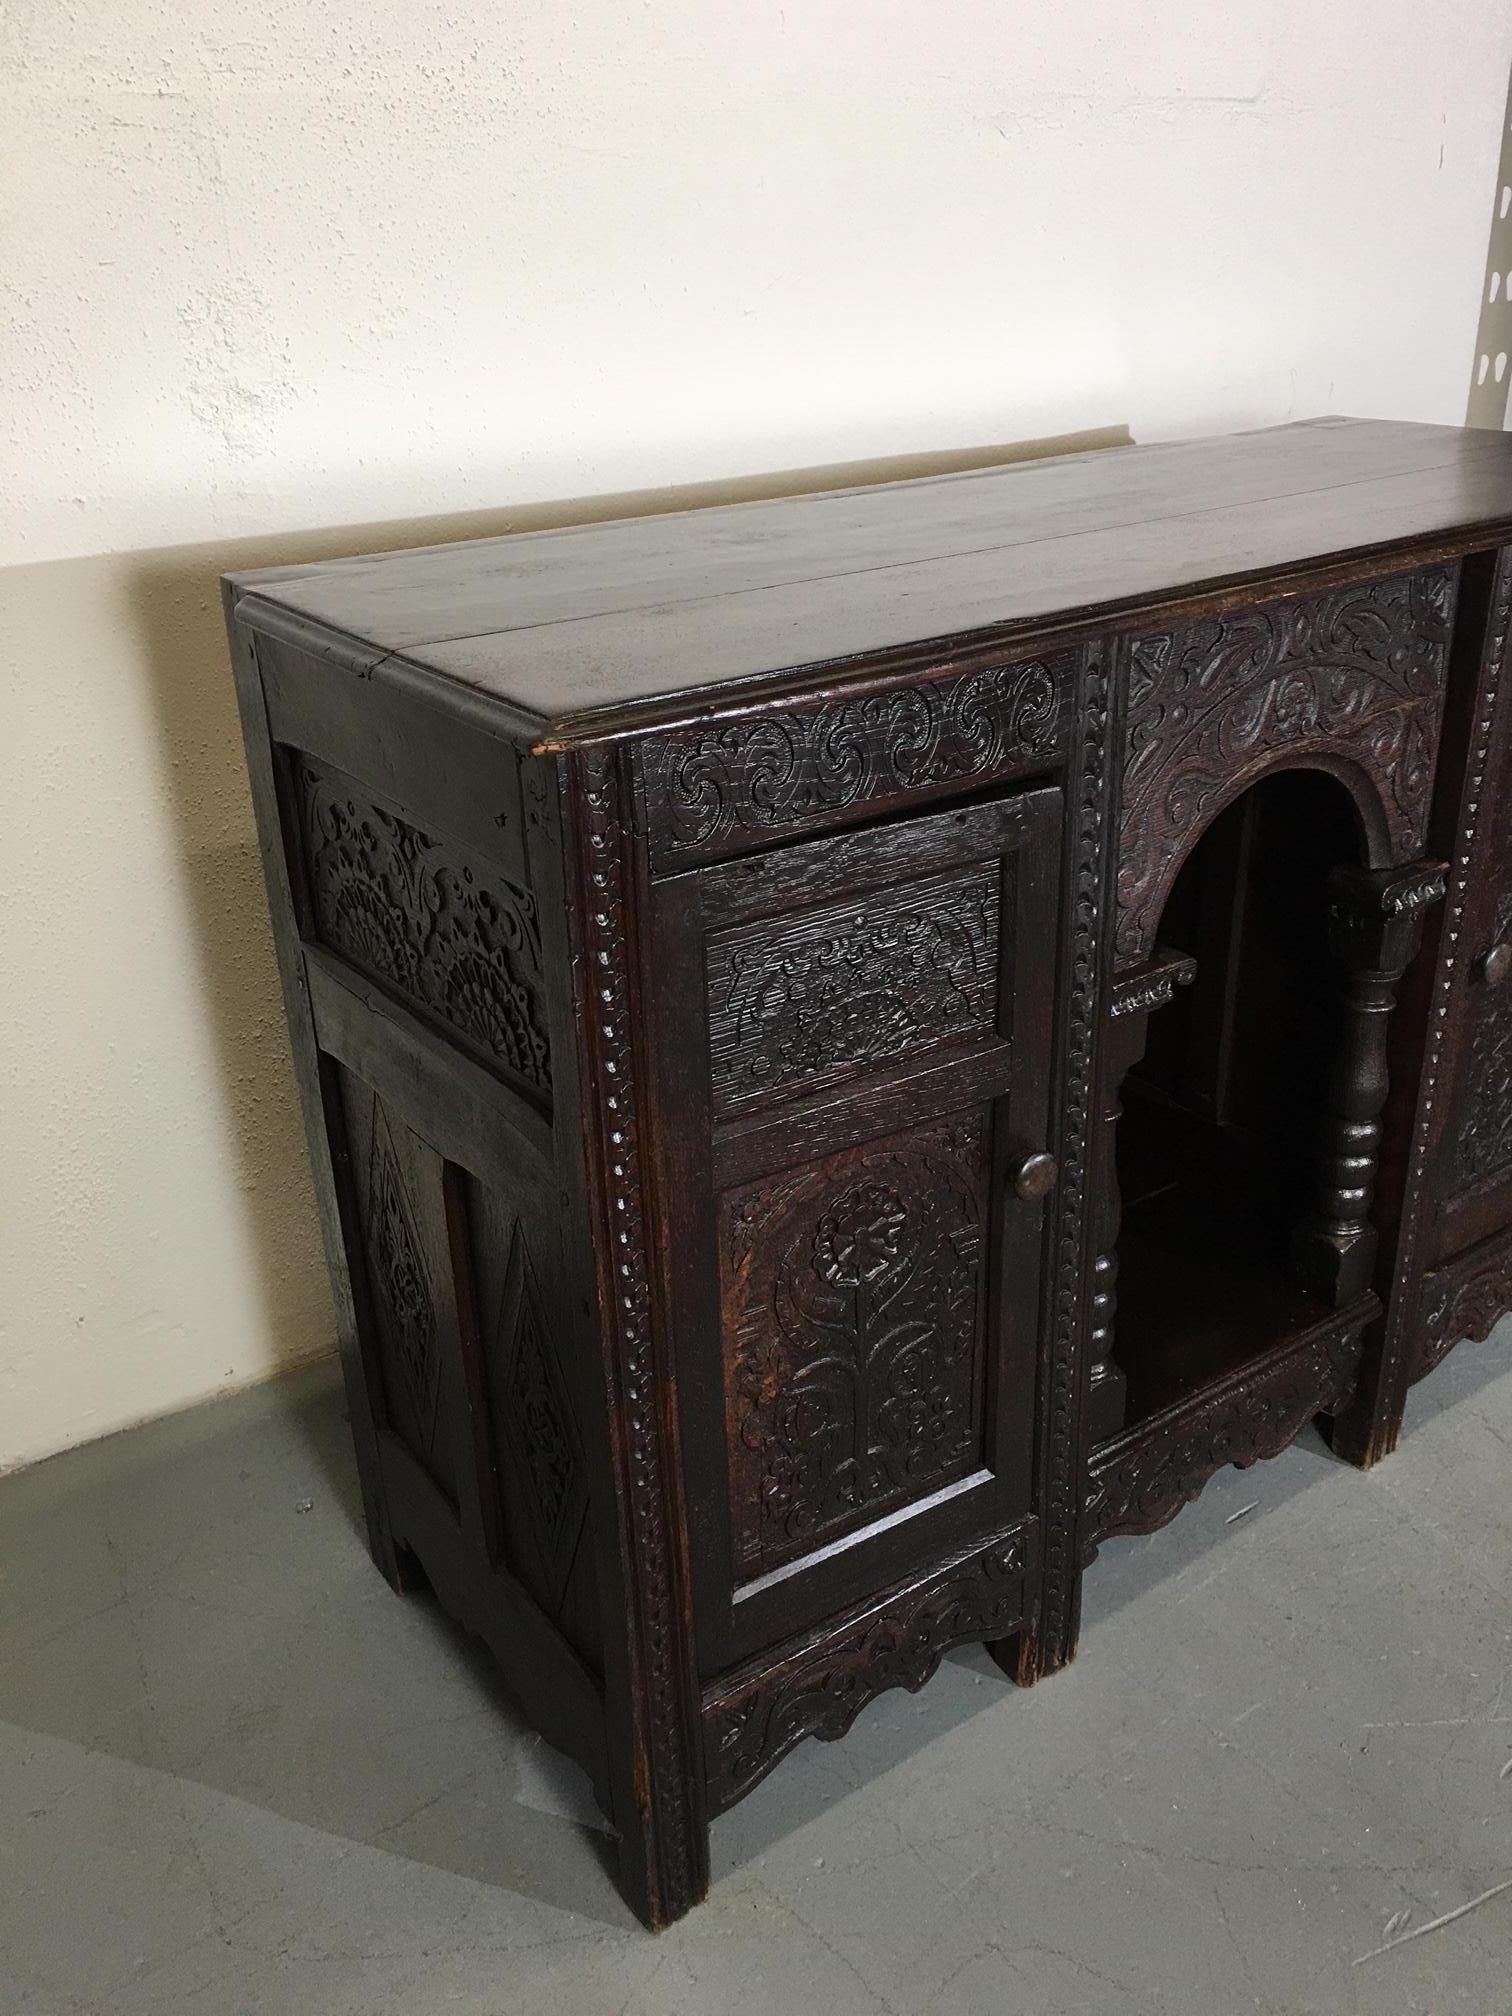 19th-century English sideboard. Carved doors on each side and a carved arch in the middle.